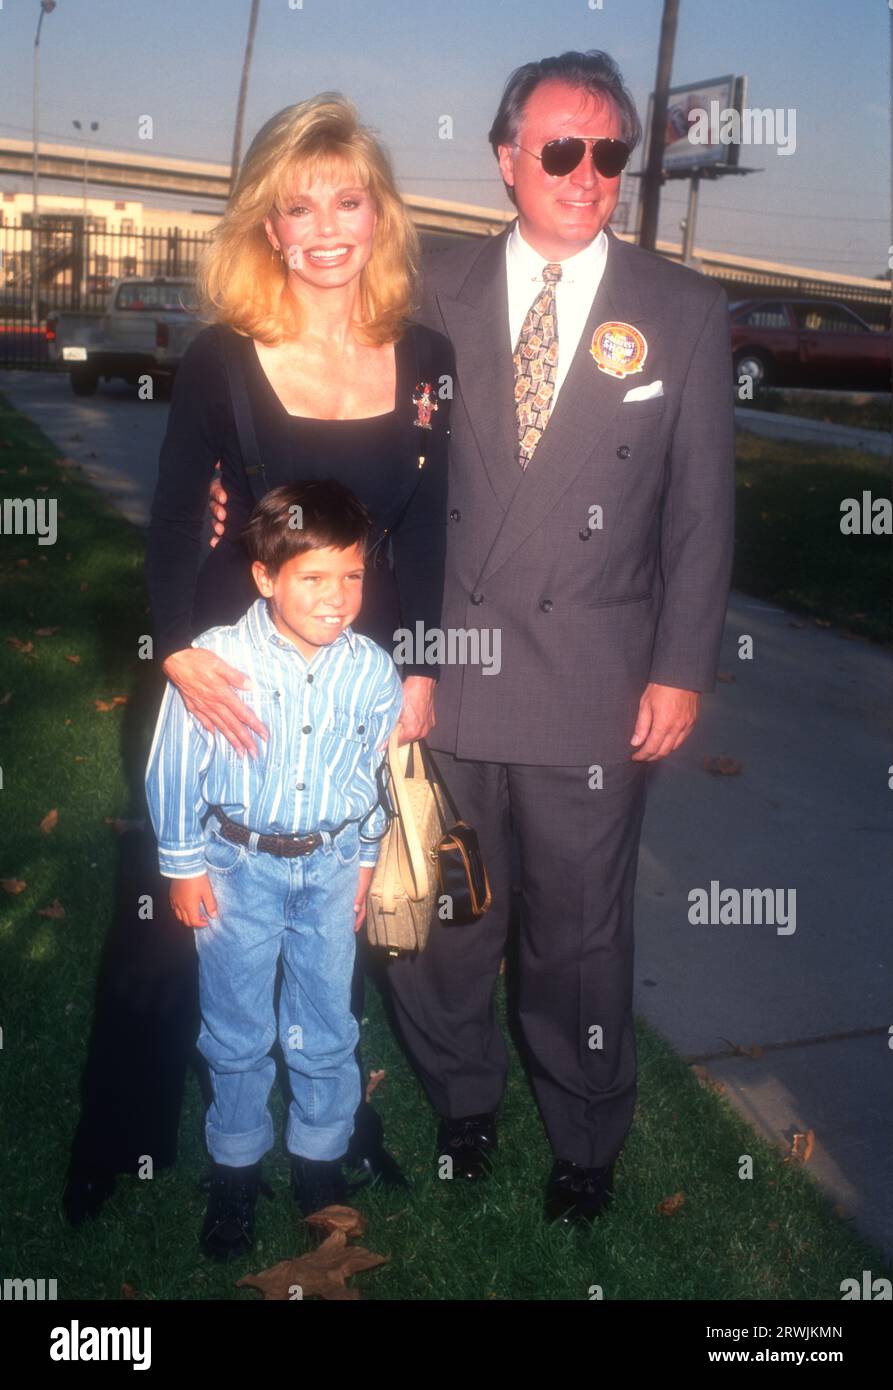 Los Angeles, California, USA 25th July 1996 Actress Loni Anderson boyfriend Geoff Brown and son Quinton Reynolds attend ÒThe Greatest Show On EarthÓ Ringling Brothers and Barnum & Bailey 126th Edition to Benefit the Variety Club ChildrenÕs Charity at the Los Angeles Sports Arena on July 25, 1996 in Los Angeles, California, USA. Photo by Barry King/Alamy Stock Photo Stock Photo